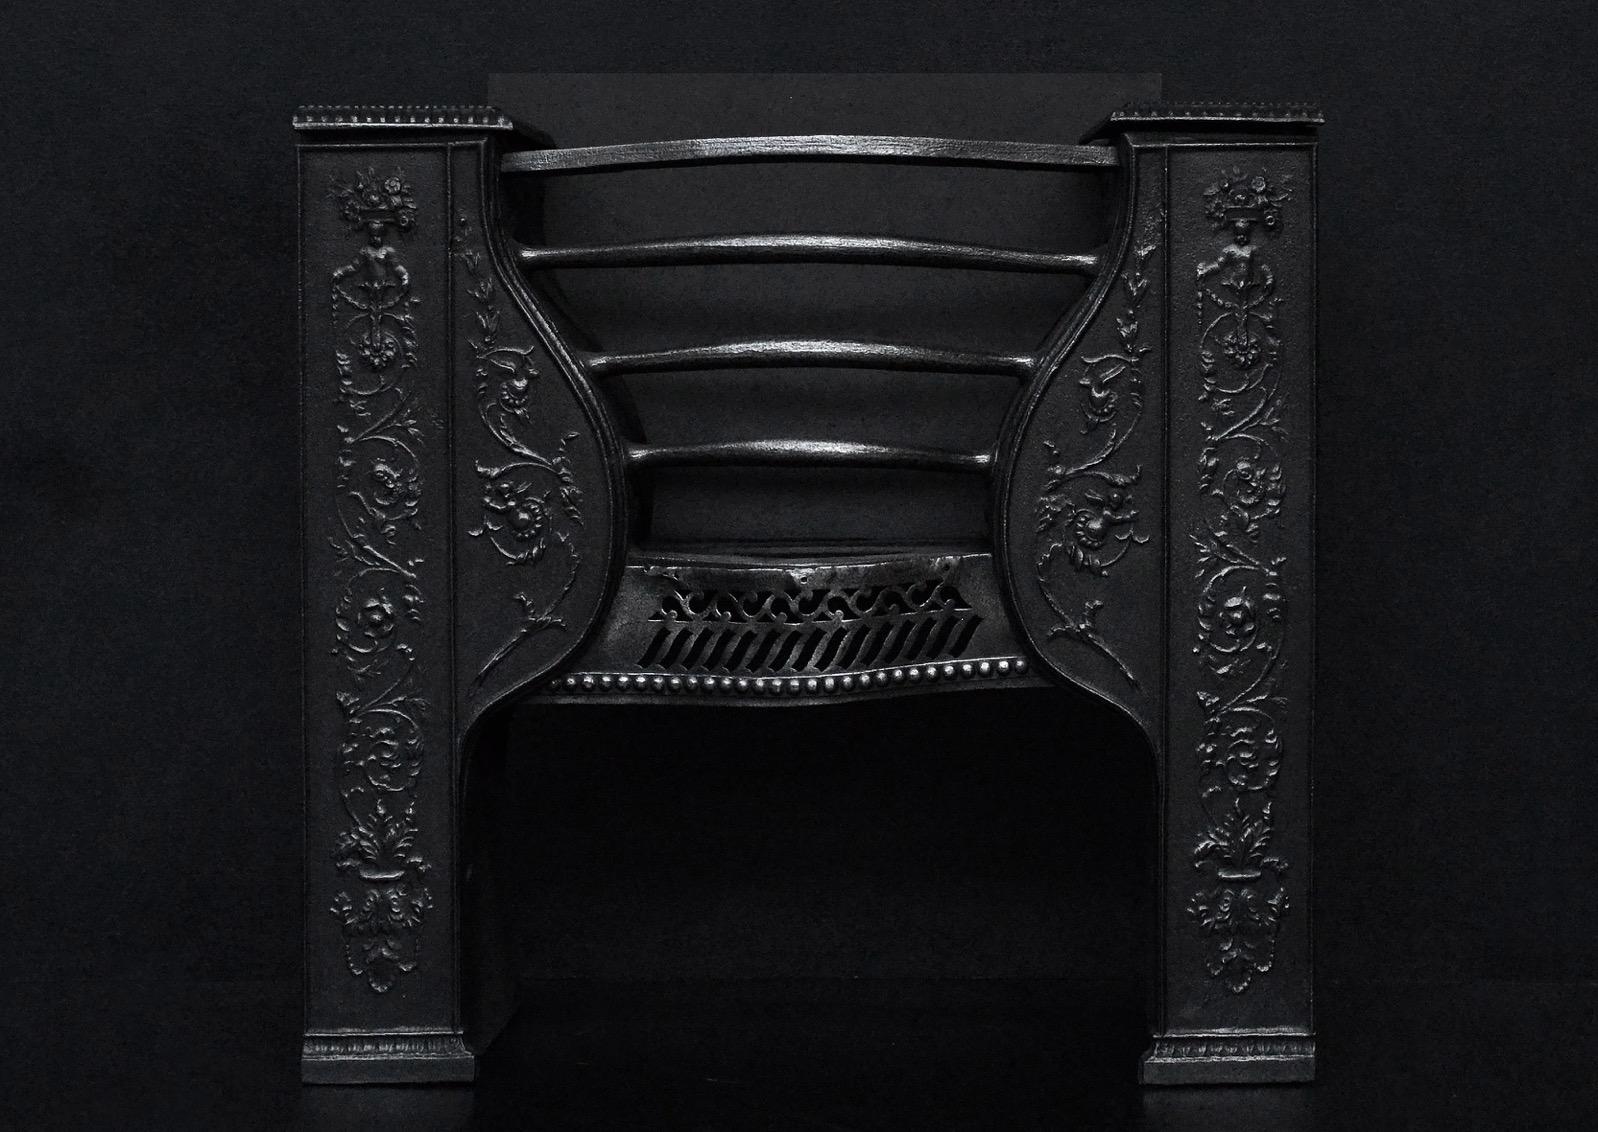 An elegant cast iron hob grate. The decorative front with foliage and scrollwork throughout. The burning area with shaped front bars with pierced fret below. English, 19th century.

Measurements: 
Width at front: 640 mm 25 1/4 in
Width at back: